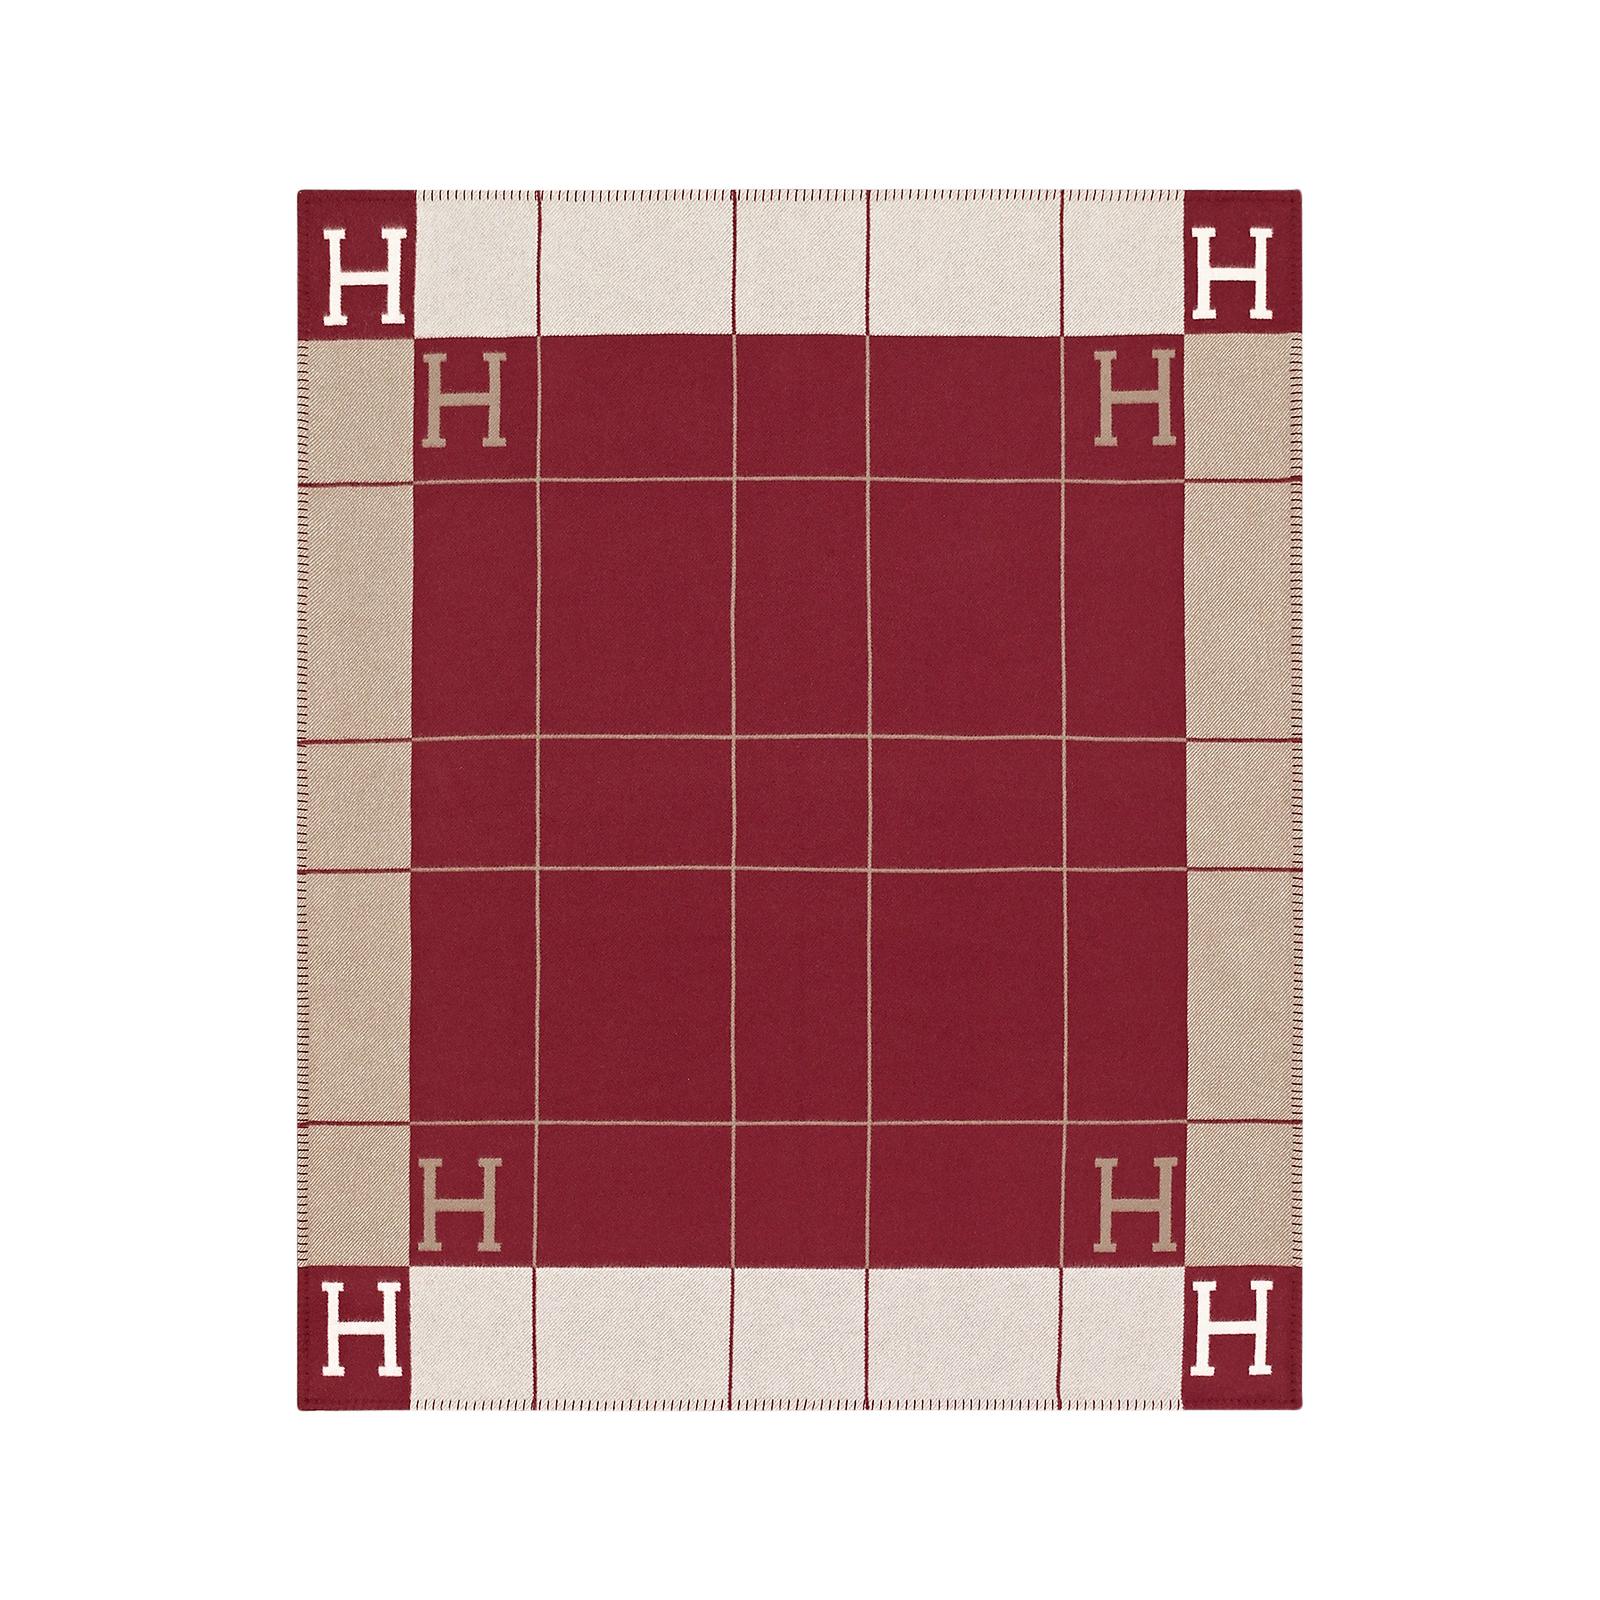 Mightychic offers an Hermes Avalon blanket featured in Rouge H.
Created from 90% Merino Wool and 10% cashmere and has whip stitch edges.
Comes with signature Hermes box.
New or Pristine Store Fresh Condition.
**Please see the matching throw pillow /